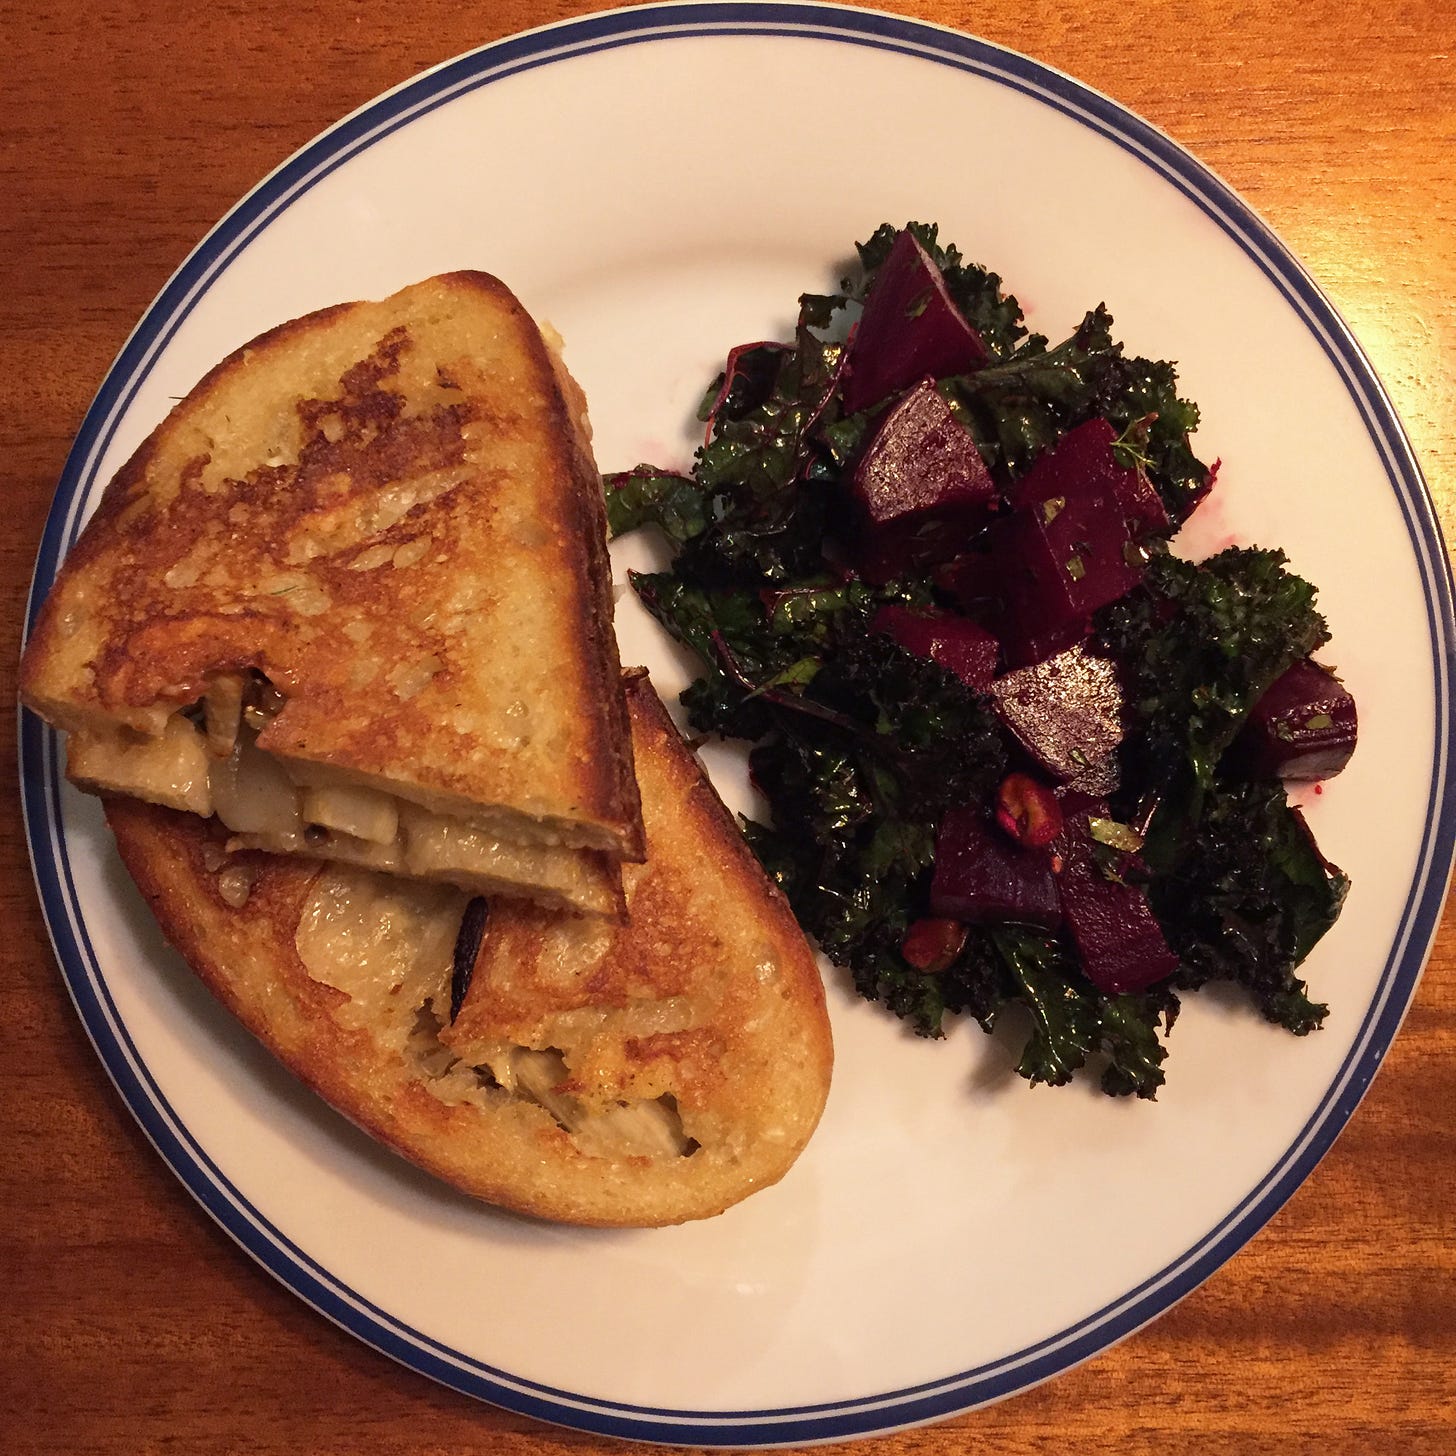 From above, a white dinner plate with two halves of a grilled cheese stacked on top of each other, on sourdough bread. Next to it is a dark red beet salad with pieces of kale and herbs visible throughout.